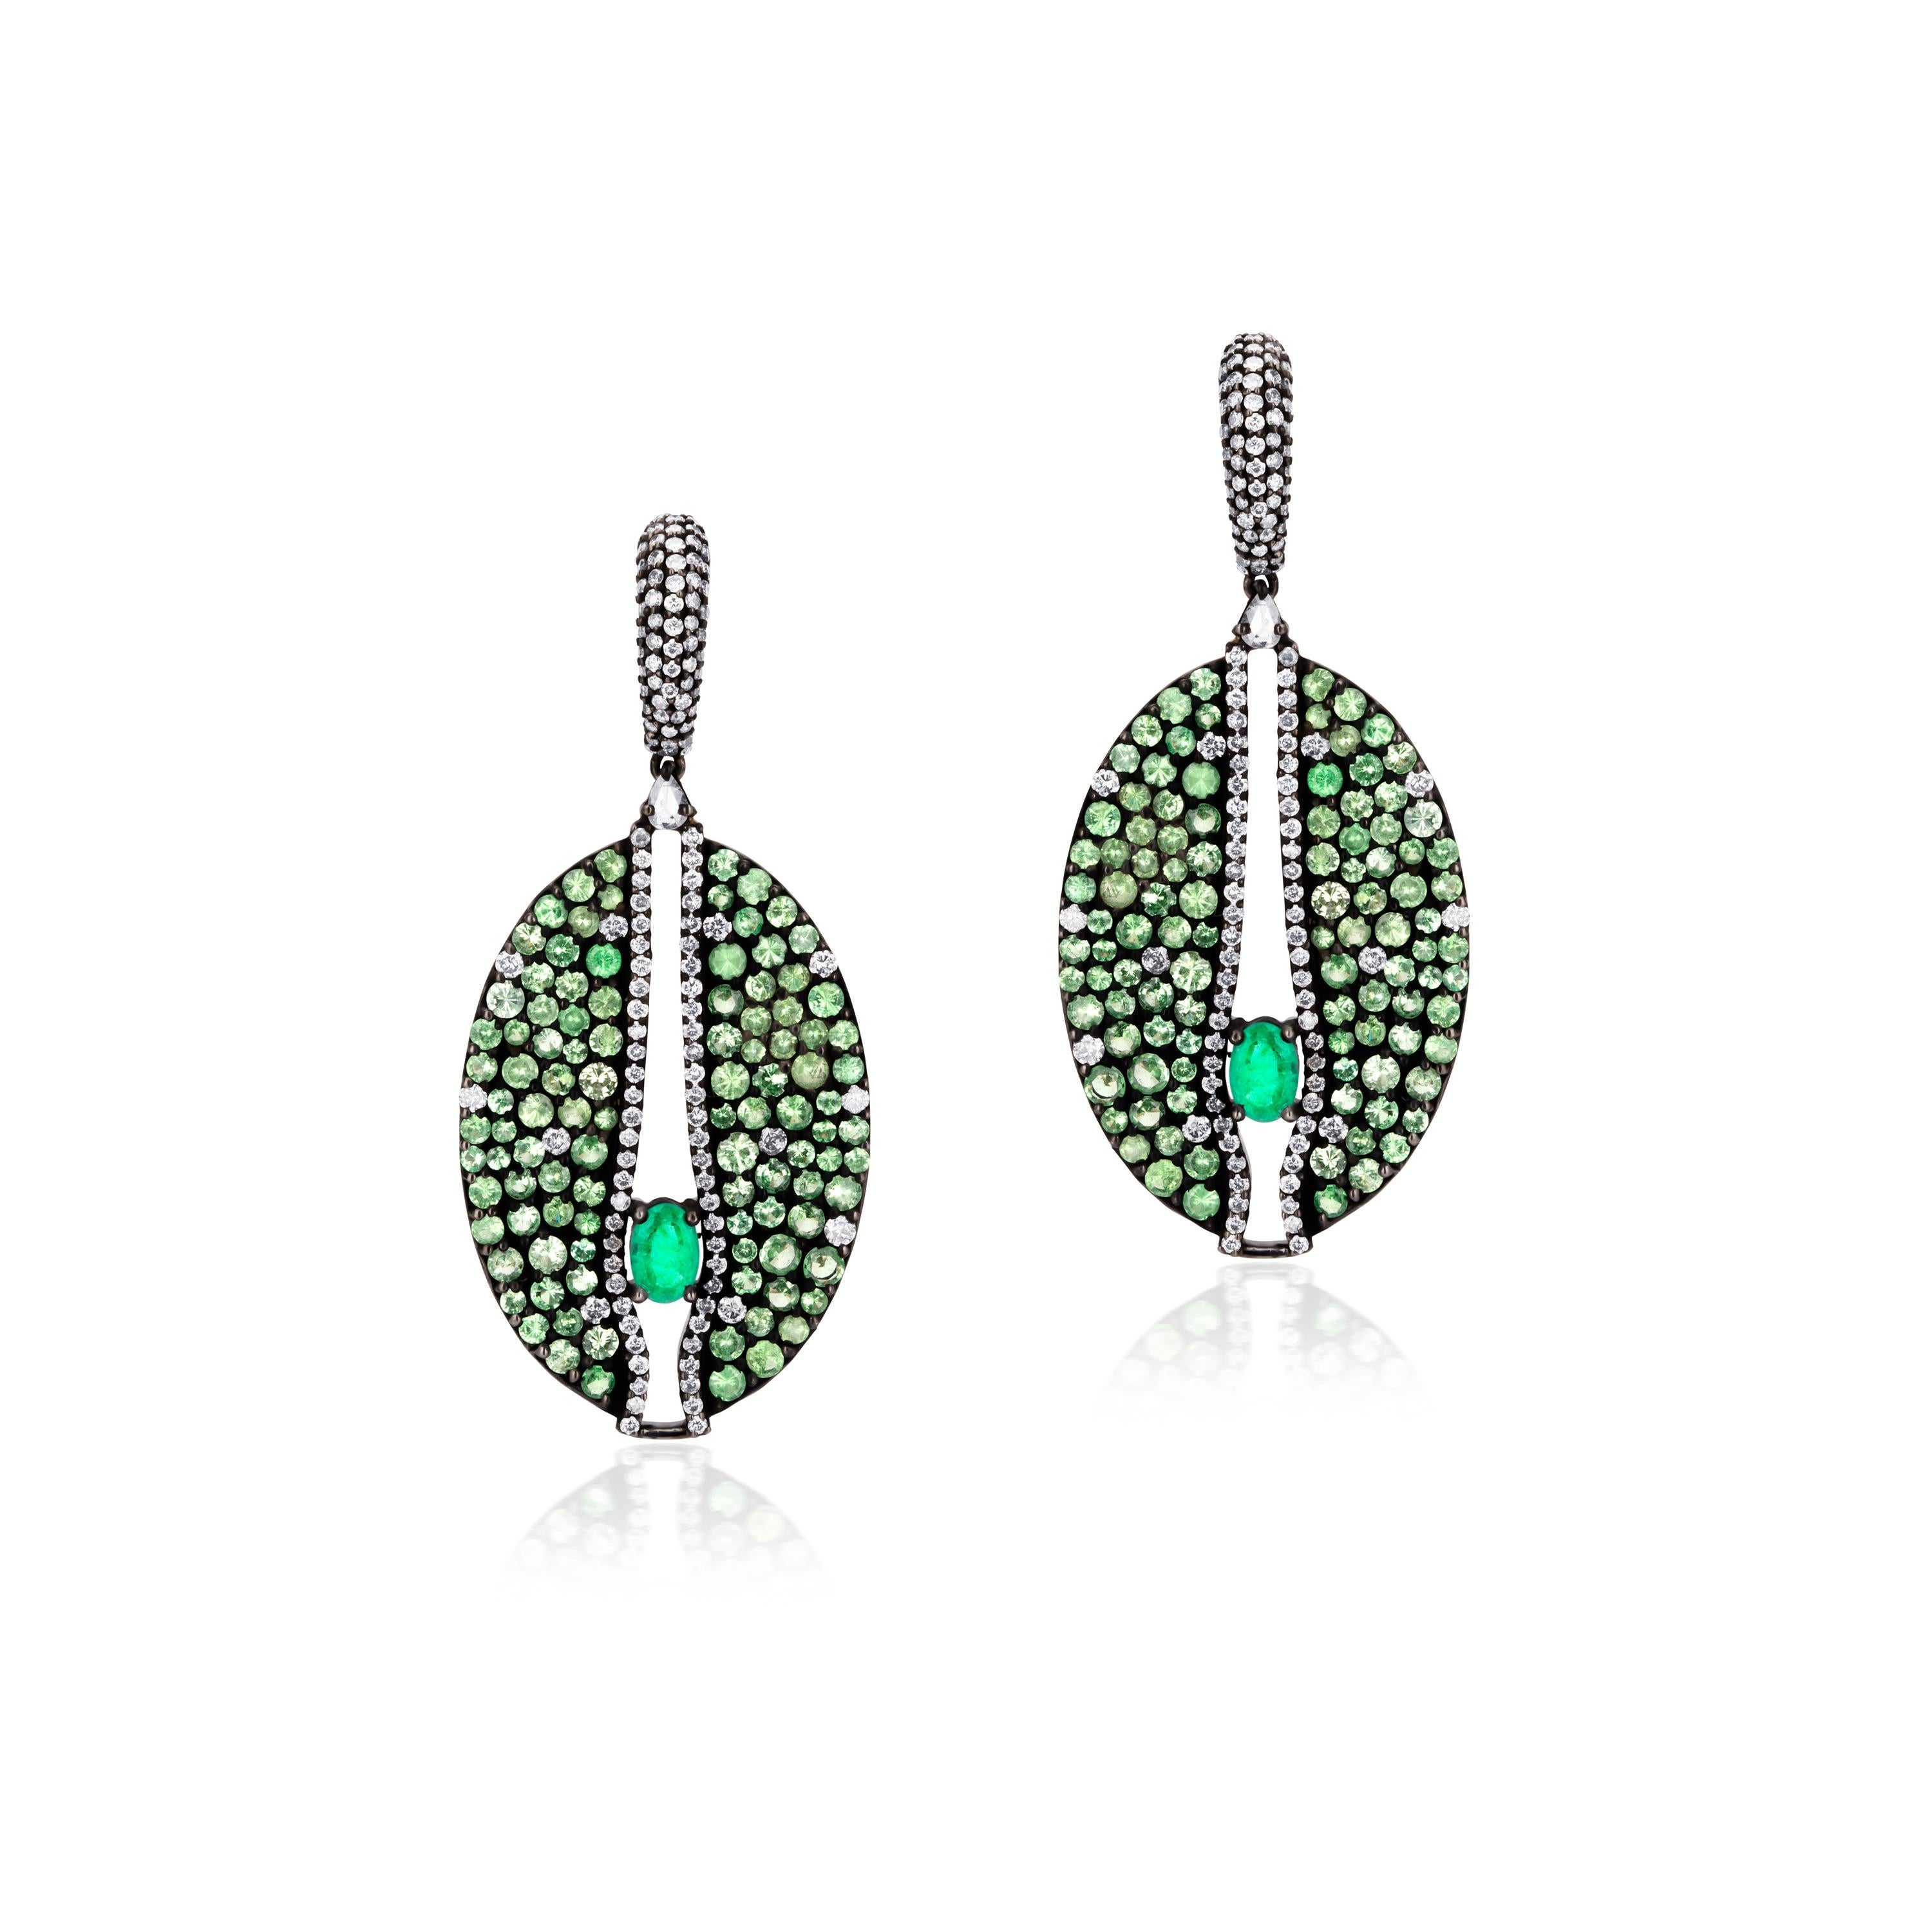 A gorgeously matched pair of unfaltering sparkle. The oval drops in black metal sparkle with dots of brilliant cut prong set green round tsavorietes and diamonds. The open space between the two parts of the oval drop is dotted with lines of round